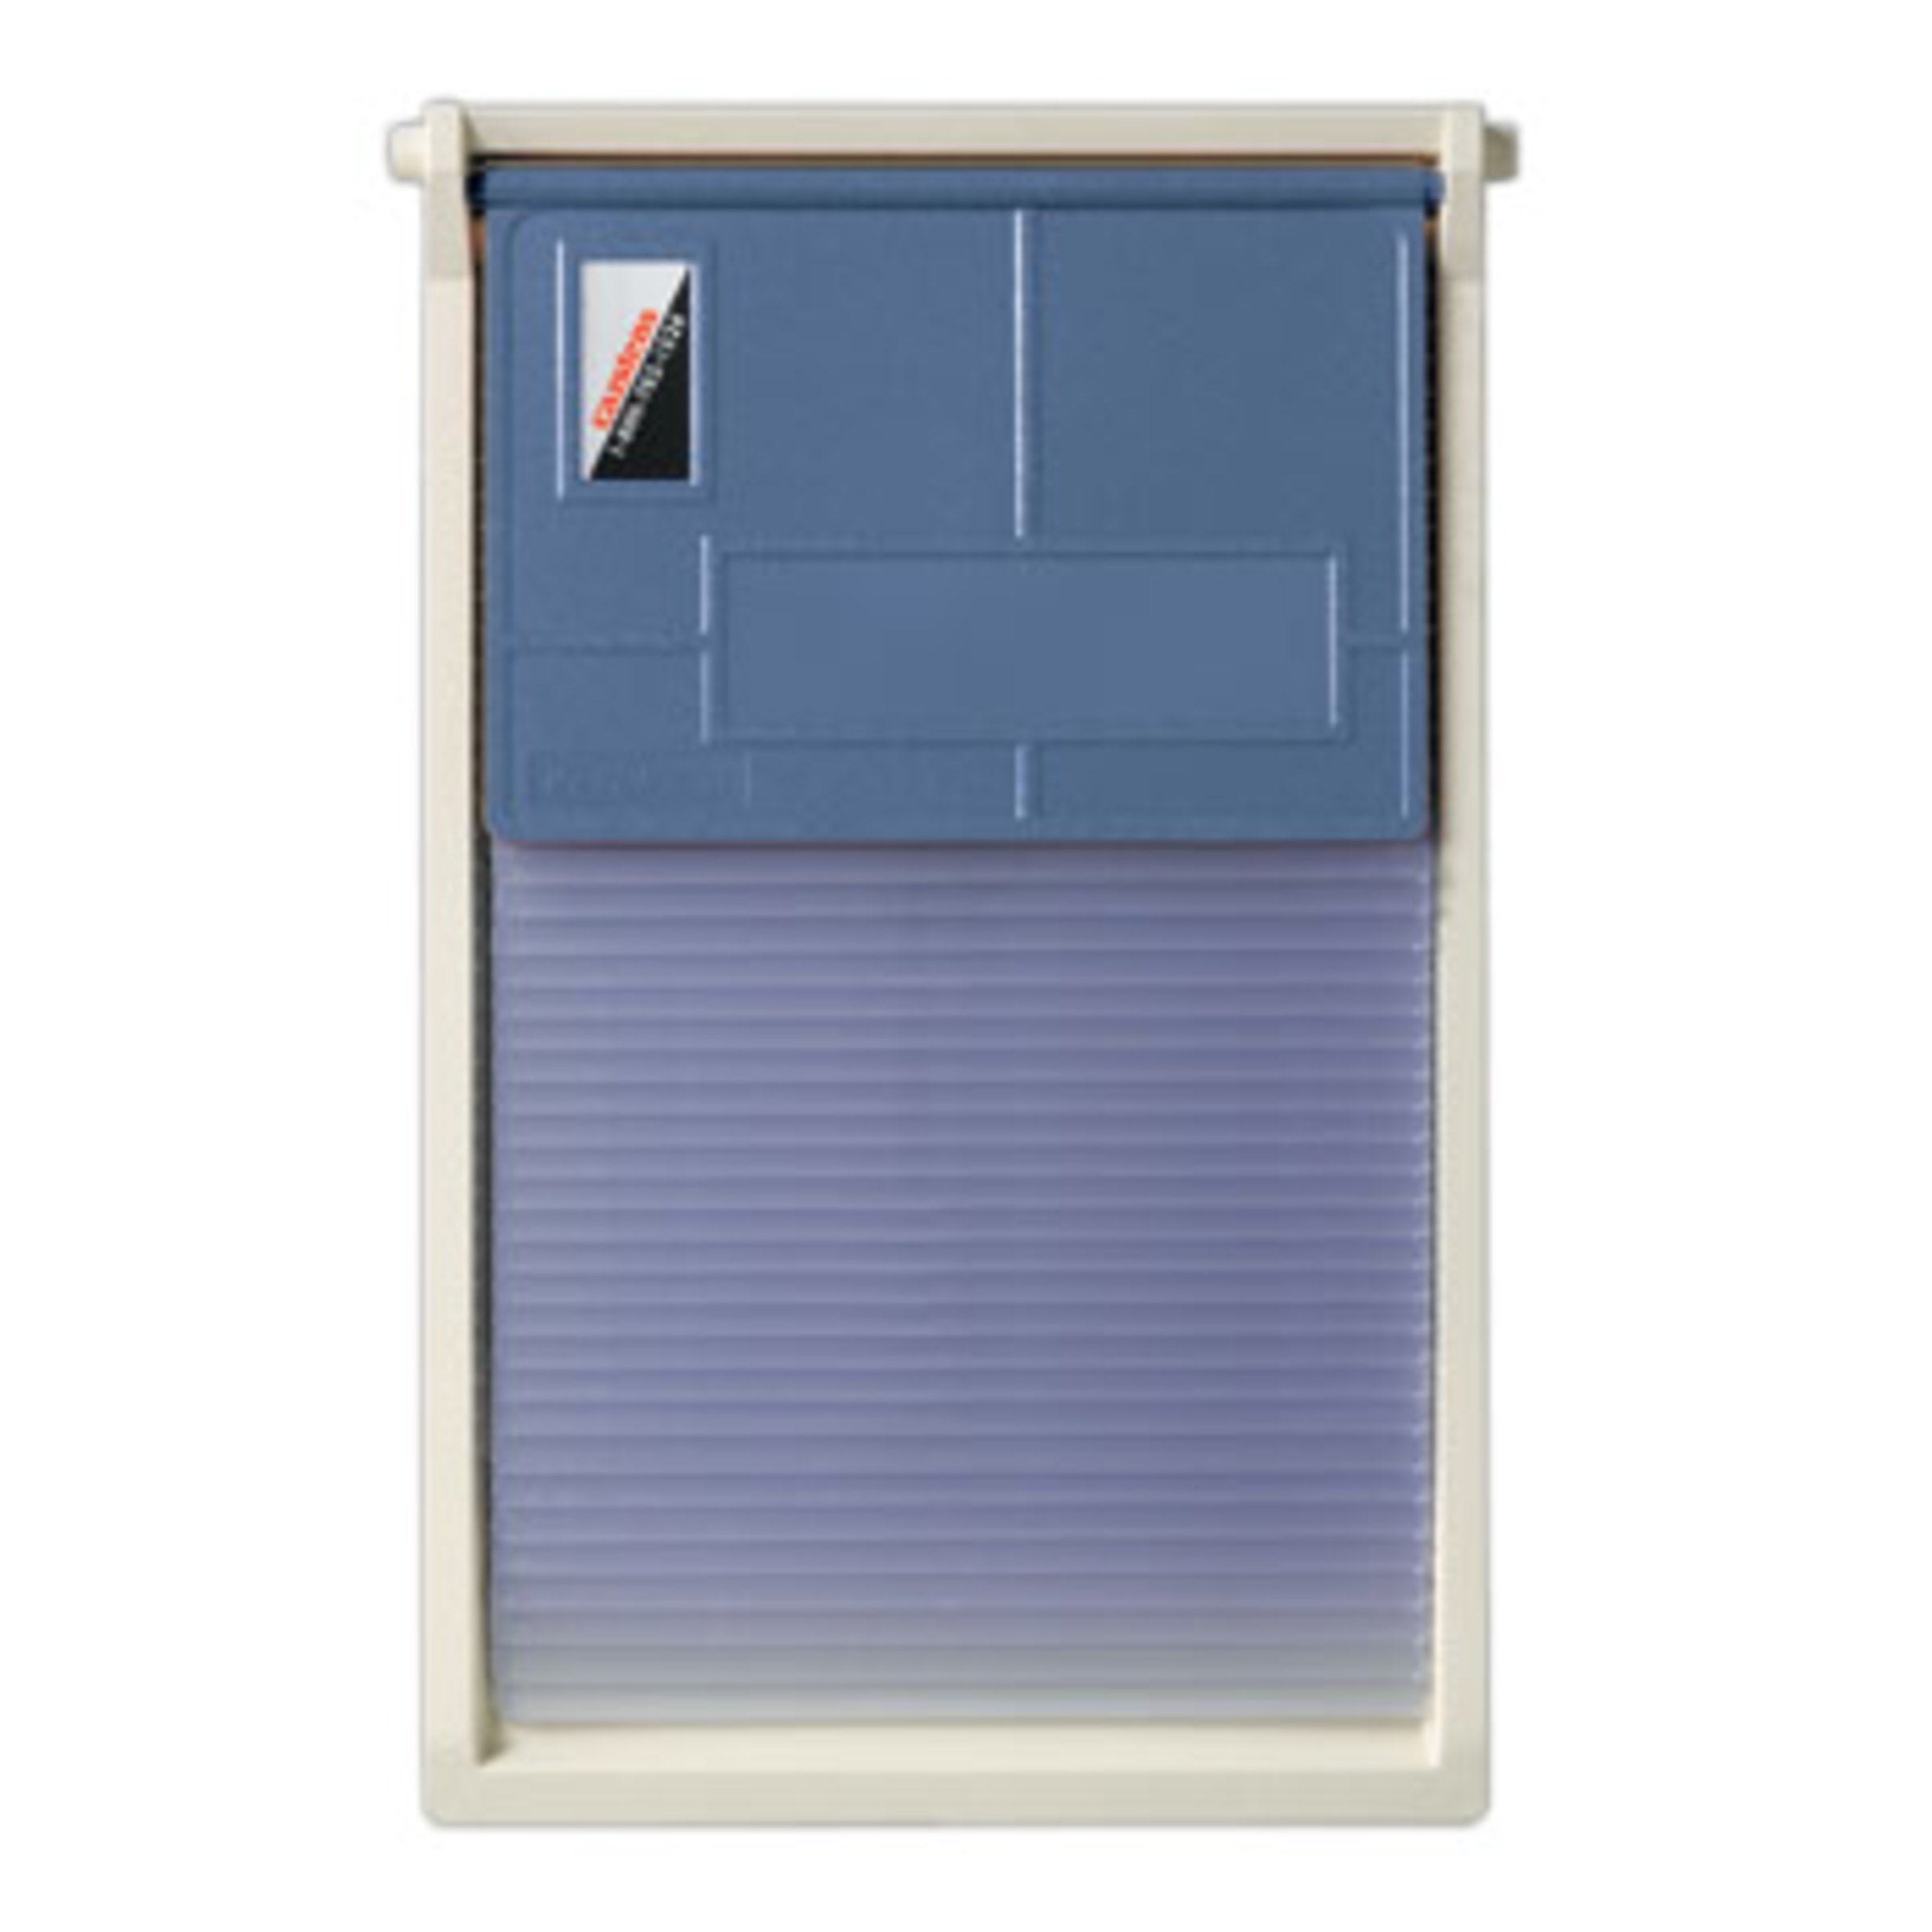 Kardex Visitray Document Filing System for 8" x 5" Sheets